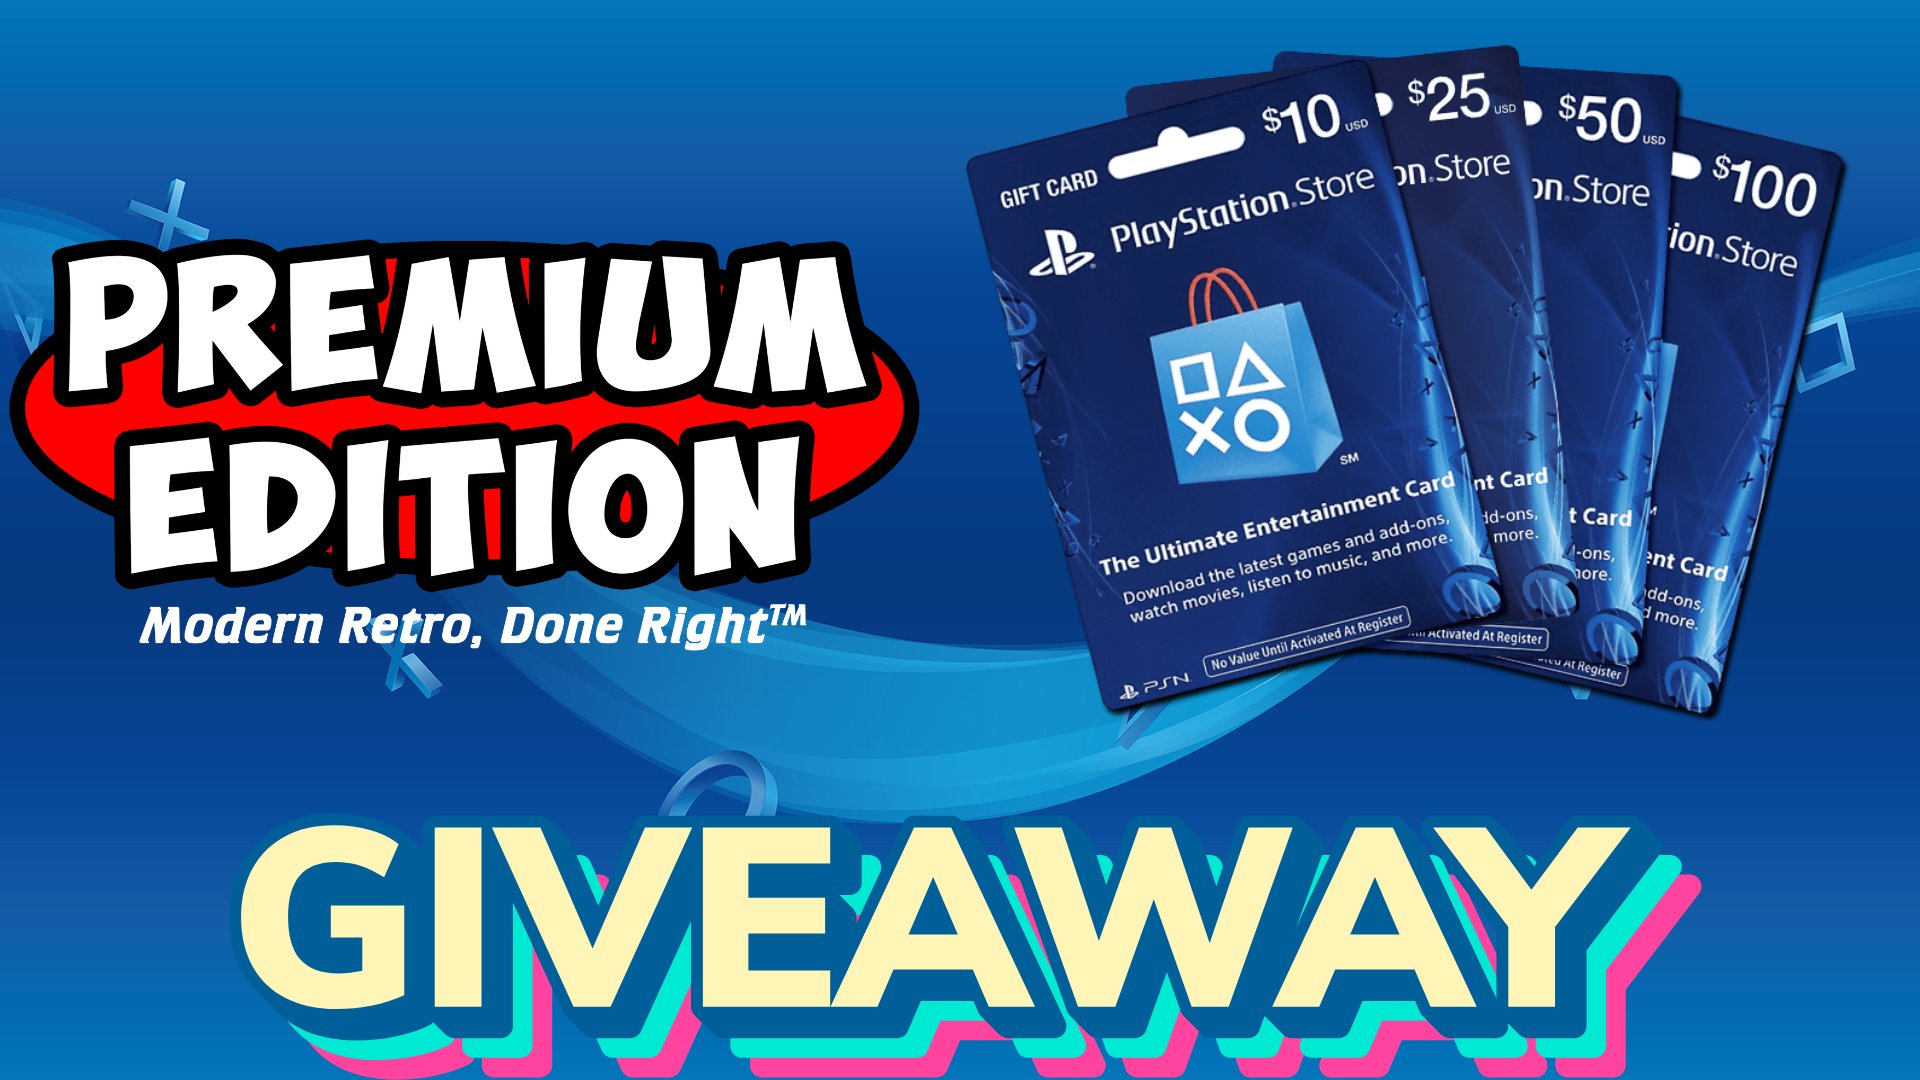 Premium Edition Games on Twitter: "📢STATE OF PREMIUM $50 PSN CARD #GIVEAWAY📢  We are celebrating our presentation that is premiering 2/22 at 7PM ET on  our YT with this HUGE Playstation themed